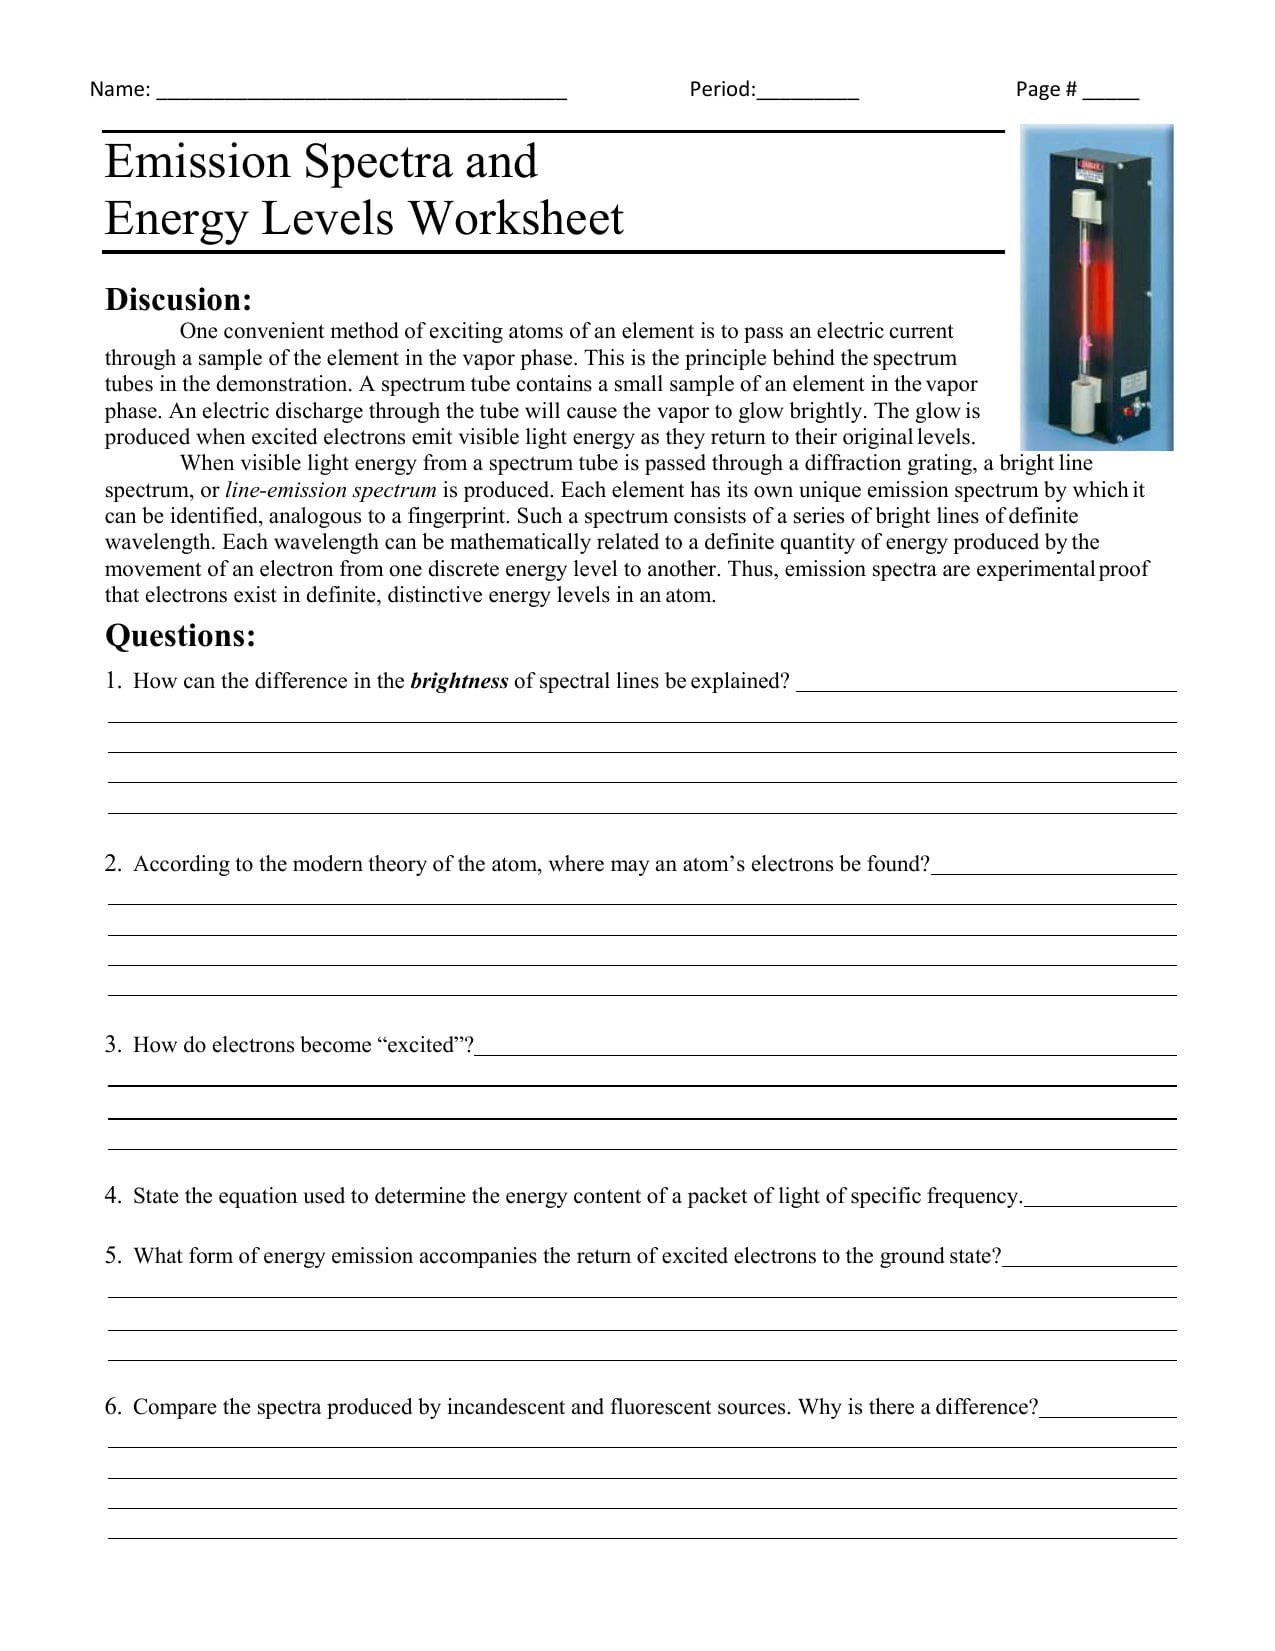 Emission Spectra And Energy Levels Worksheet Throughout Atomic Spectra Worksheet Answers